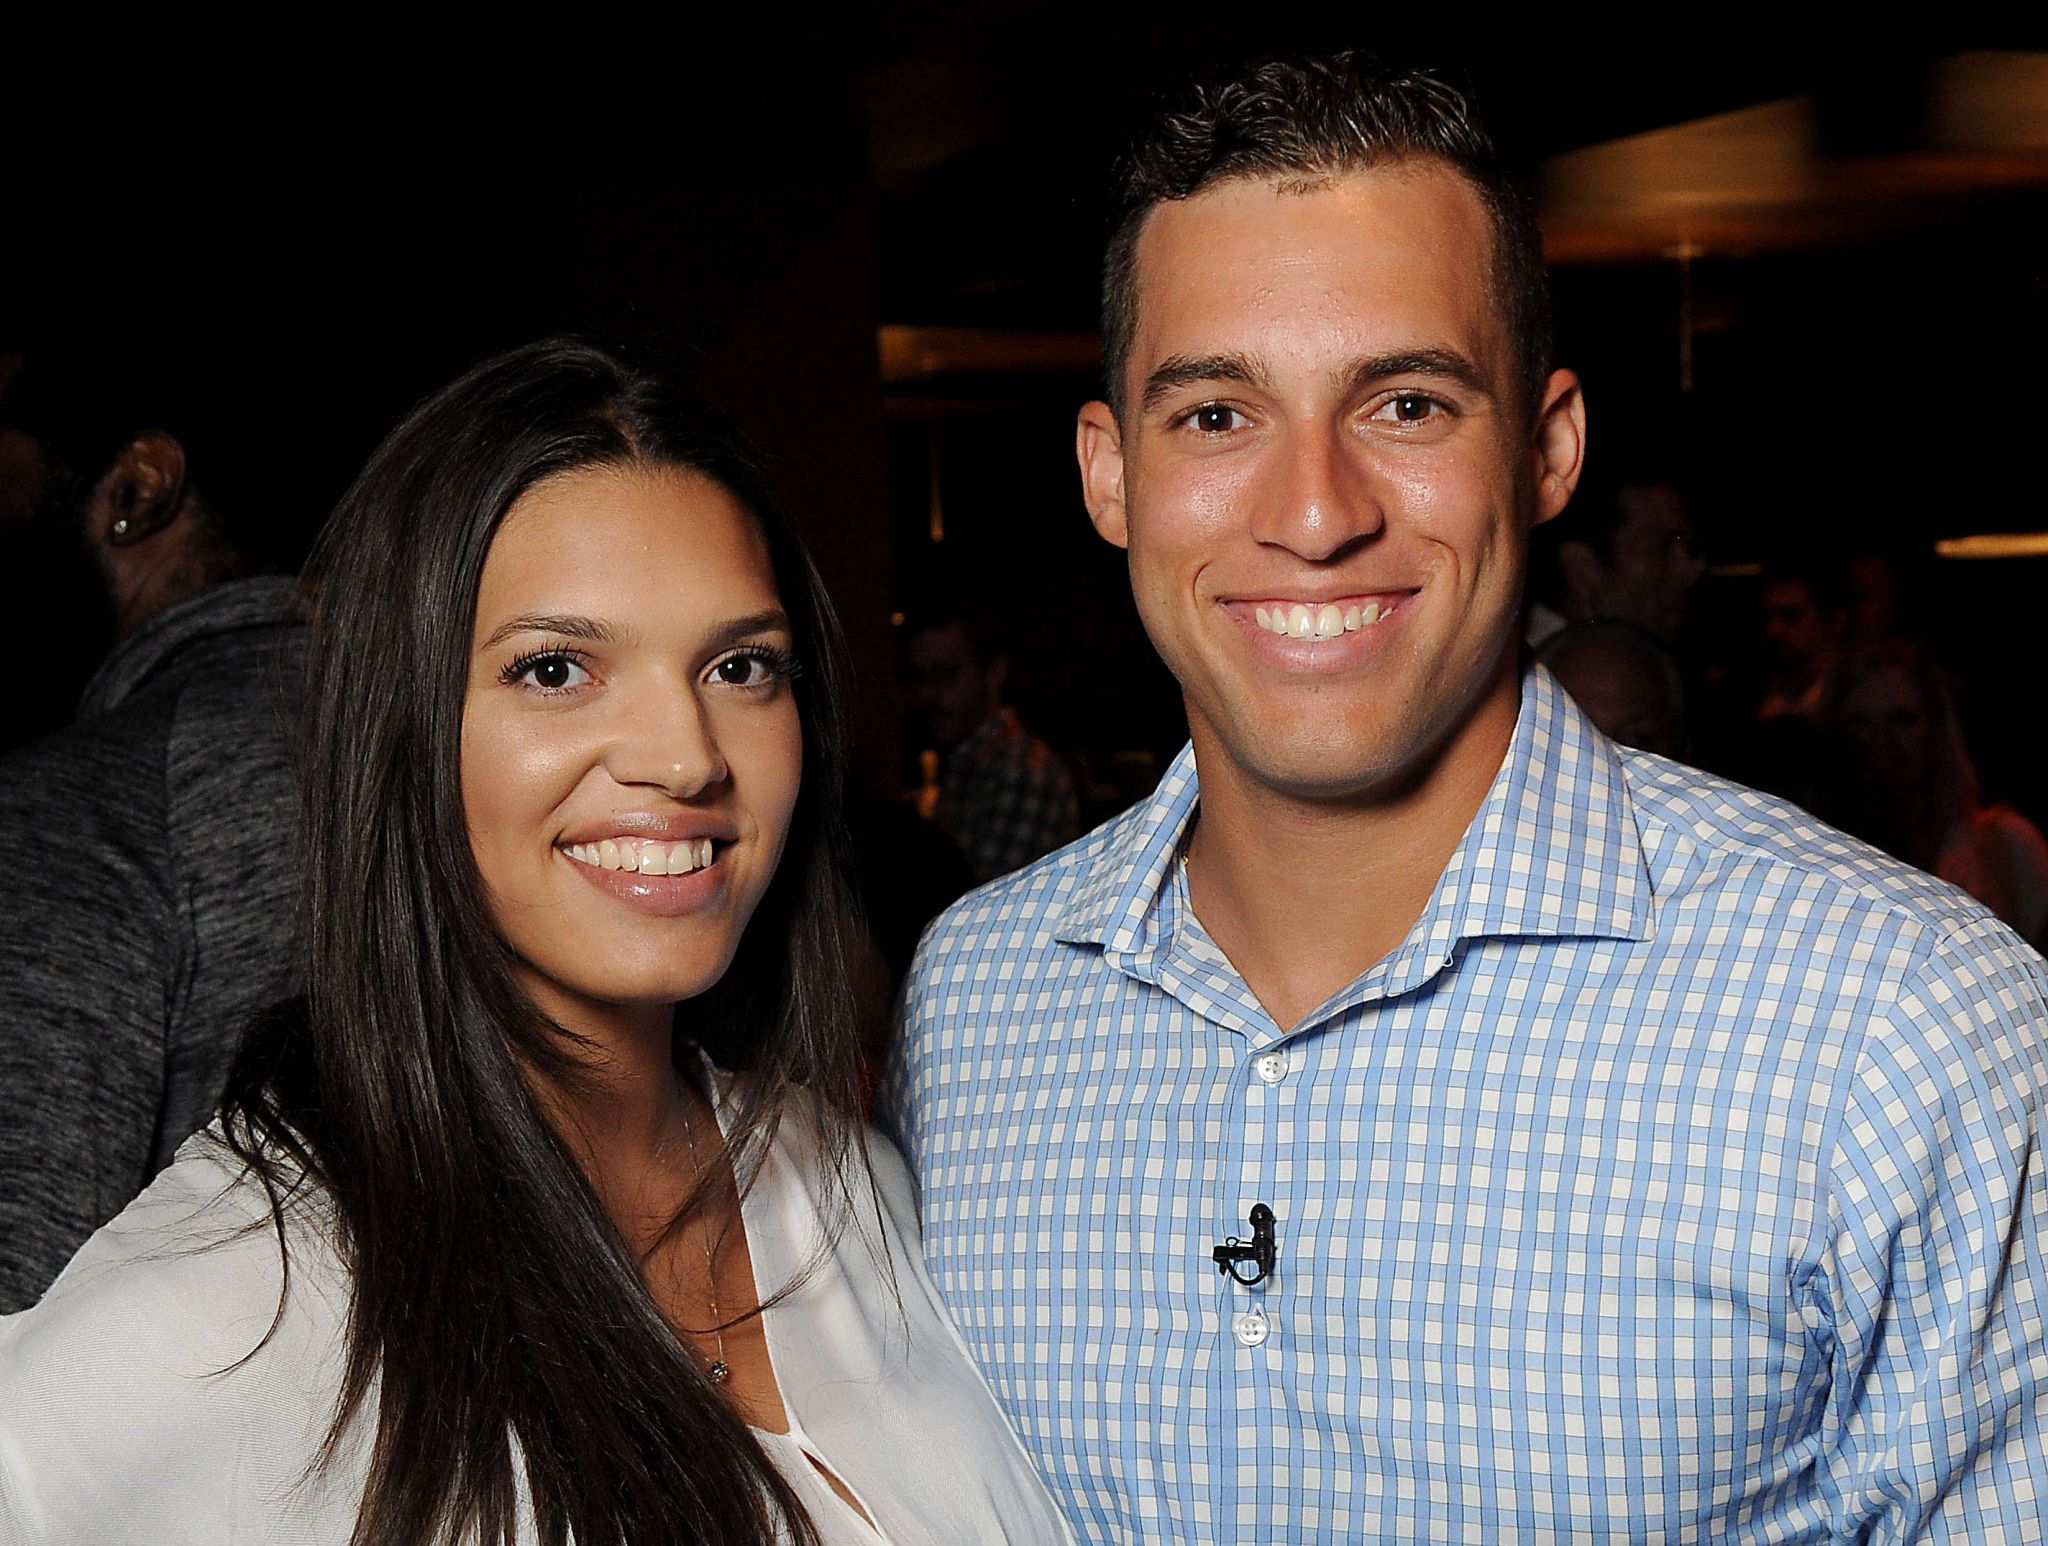 George Springer's Wife Charlise is a Former Softball Star and